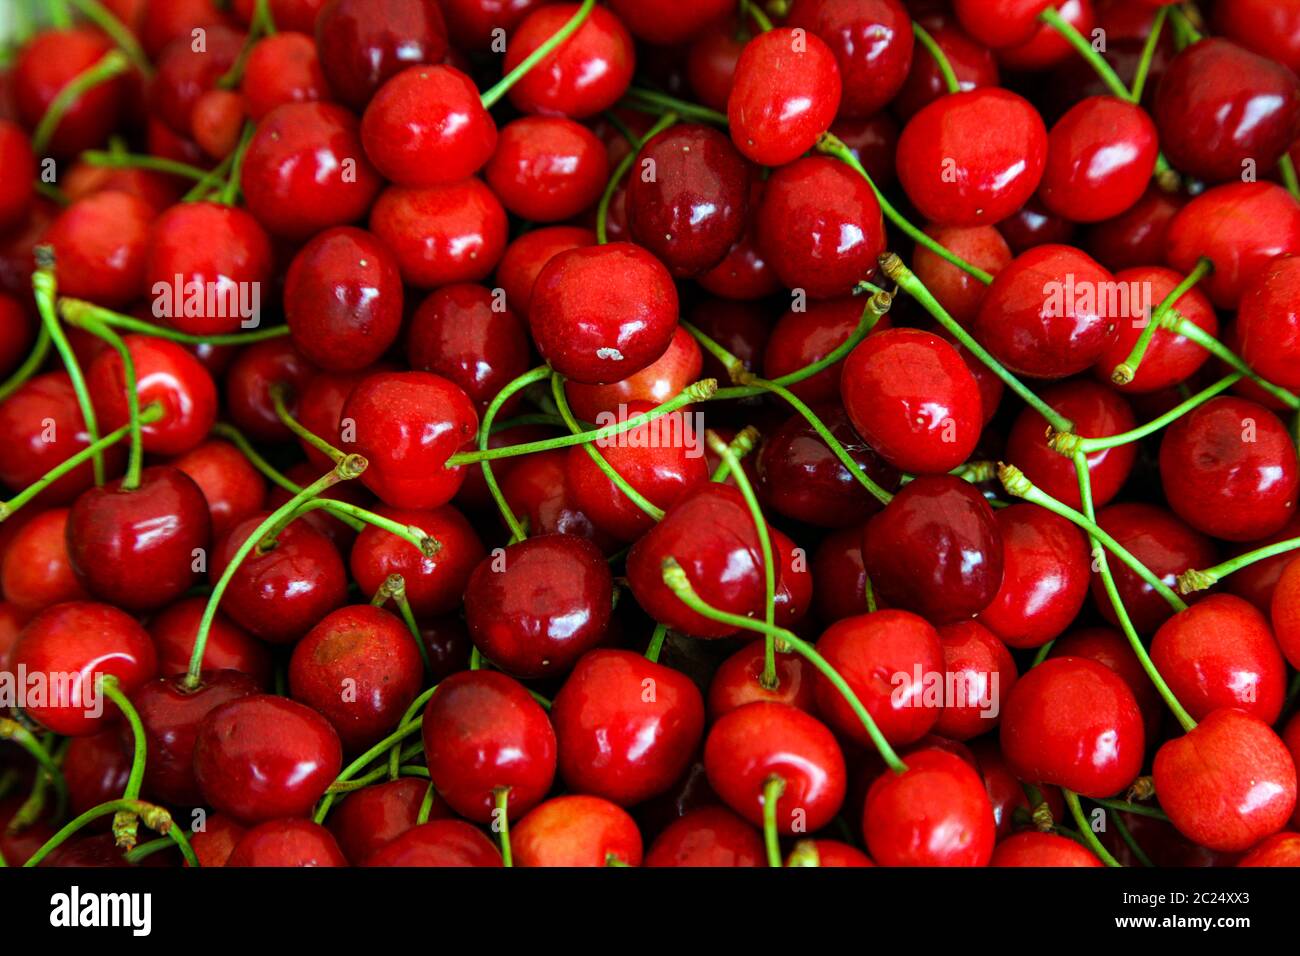 Red cherries with green stems, top view Stock Photo